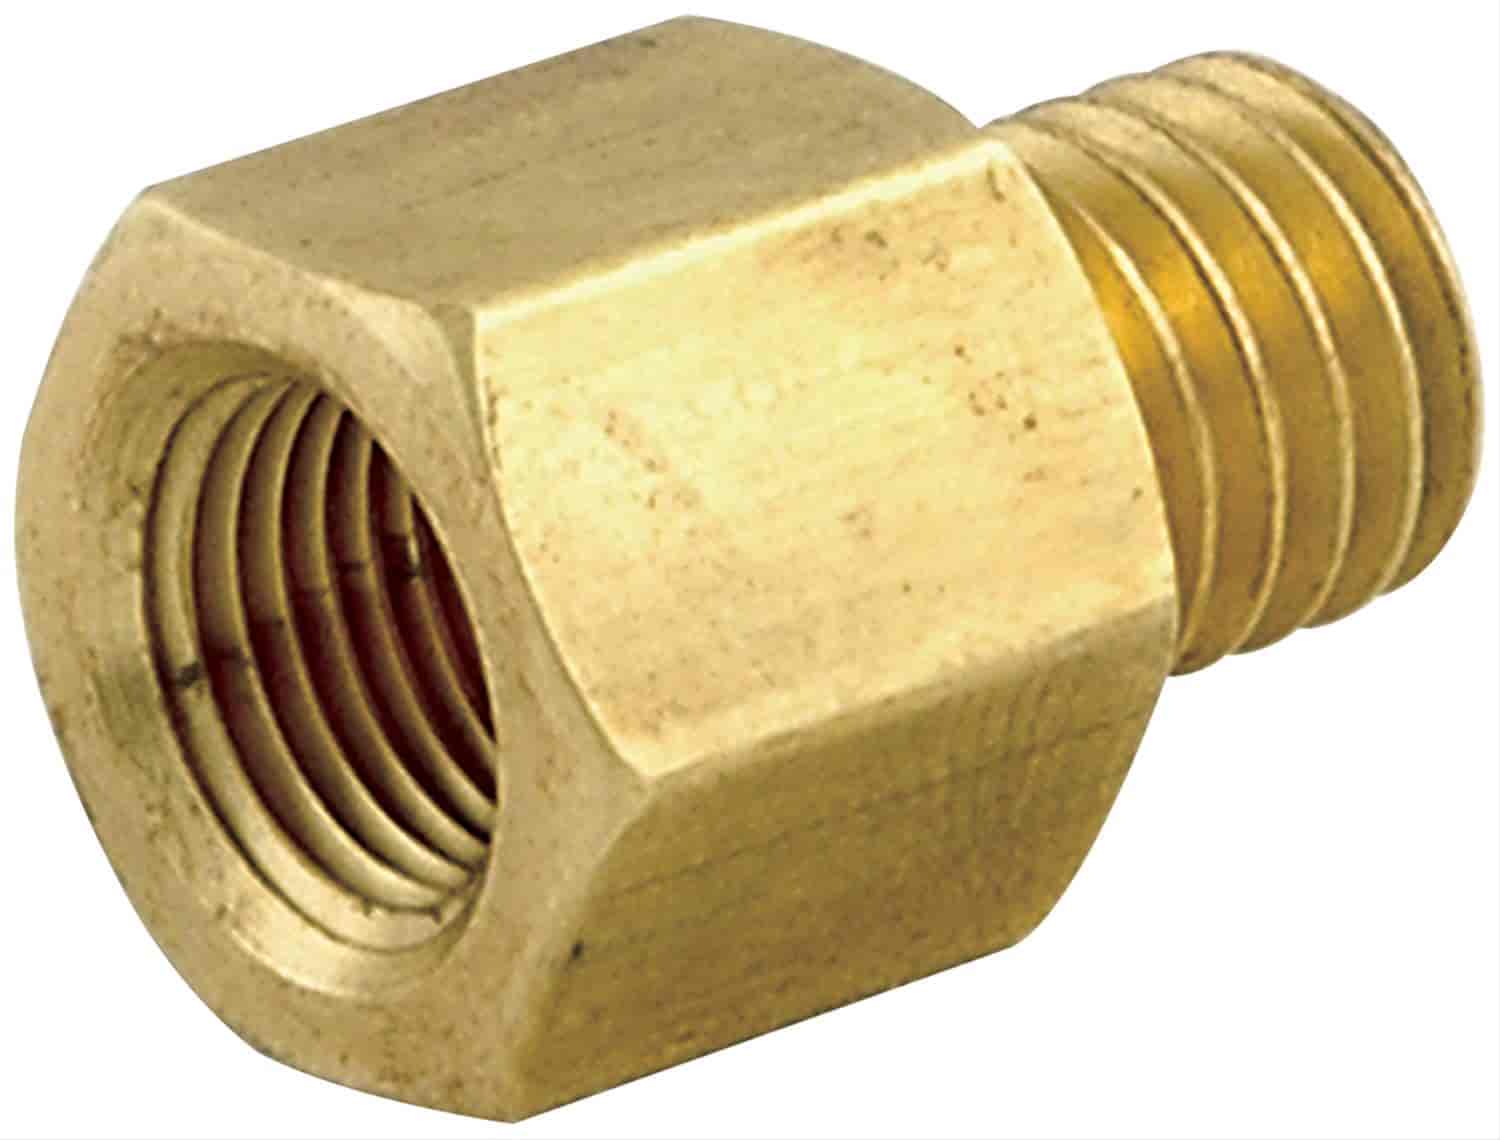 Adapter Fittings 10mm x 1.5 Male to 1/8" NPT Female